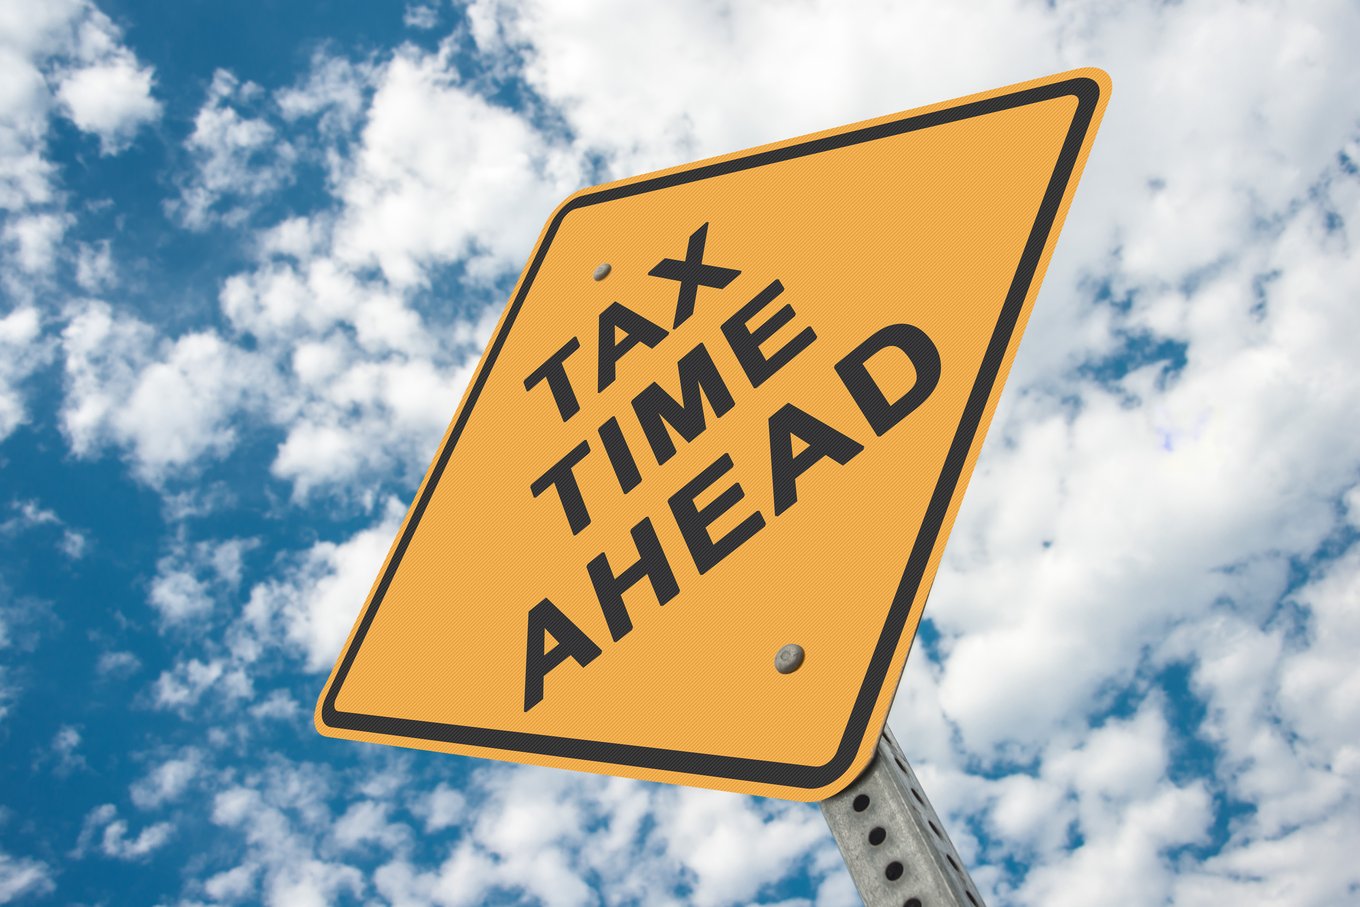 Tax Time Ahead Road Sign